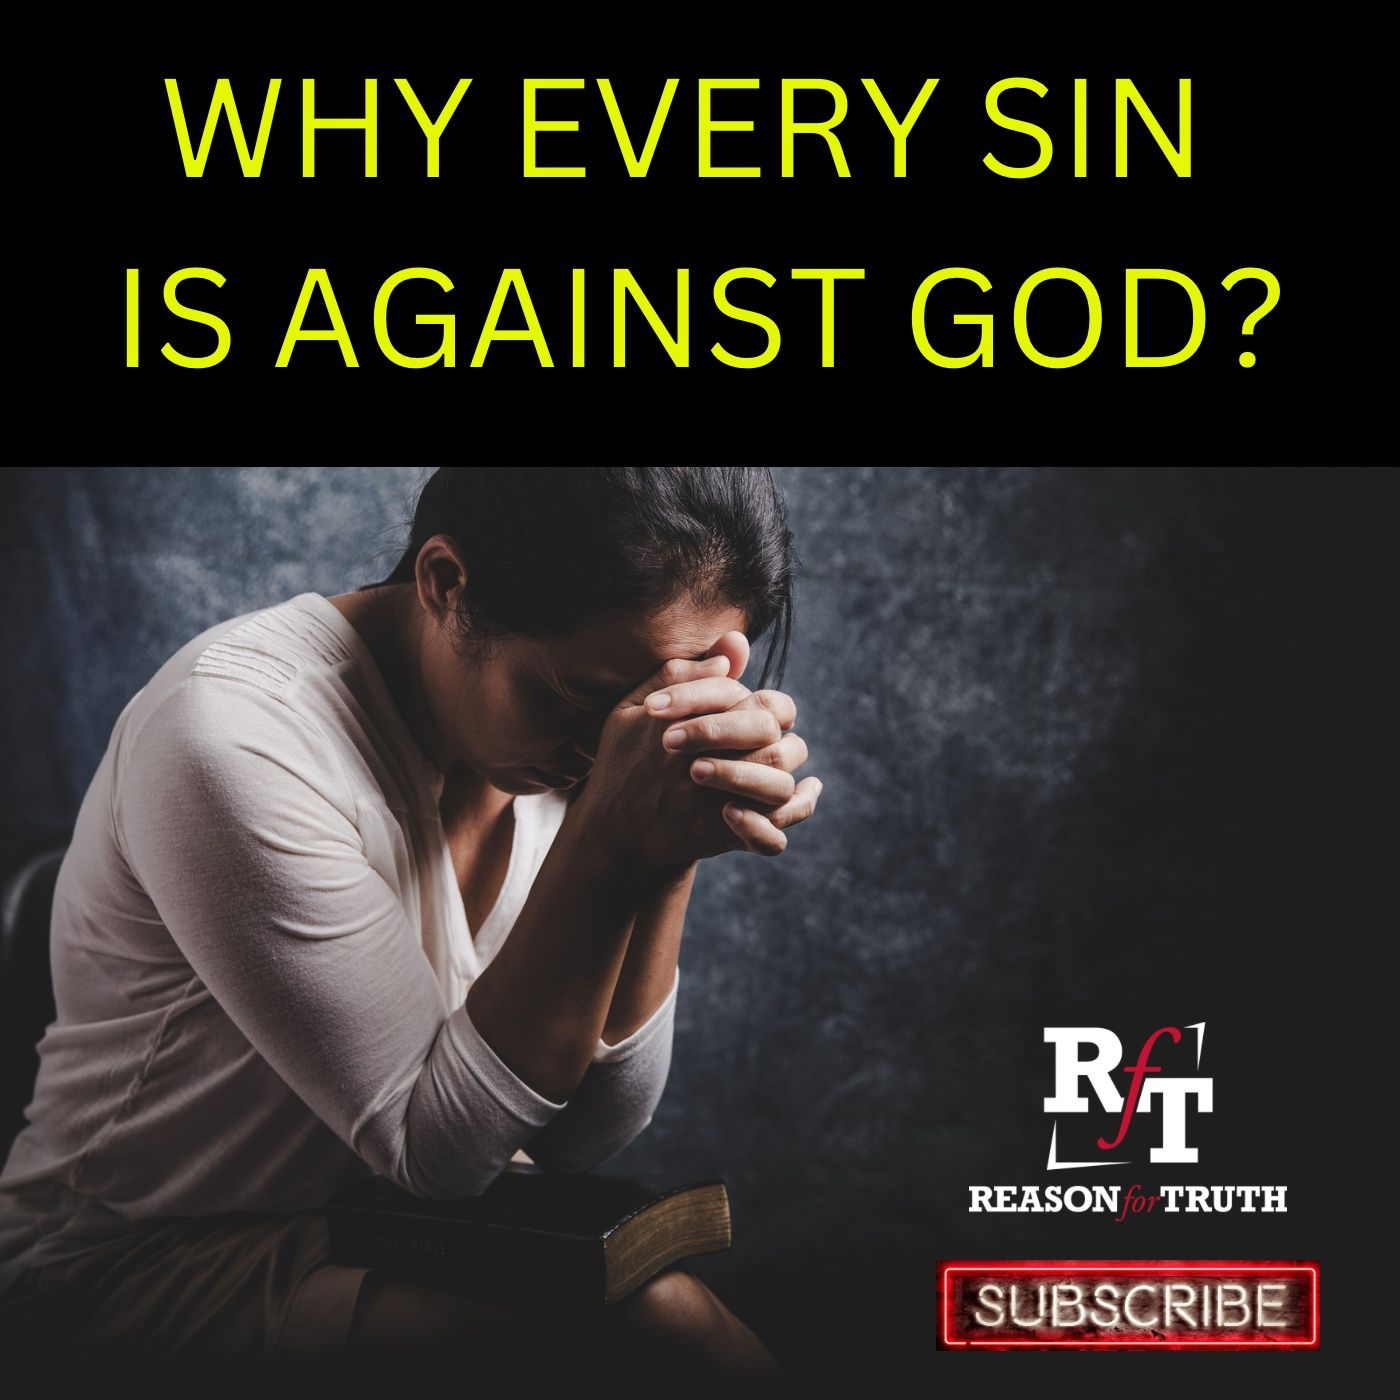 Why Is Every Sin Against God? - 11:27:22, 1.18 PM